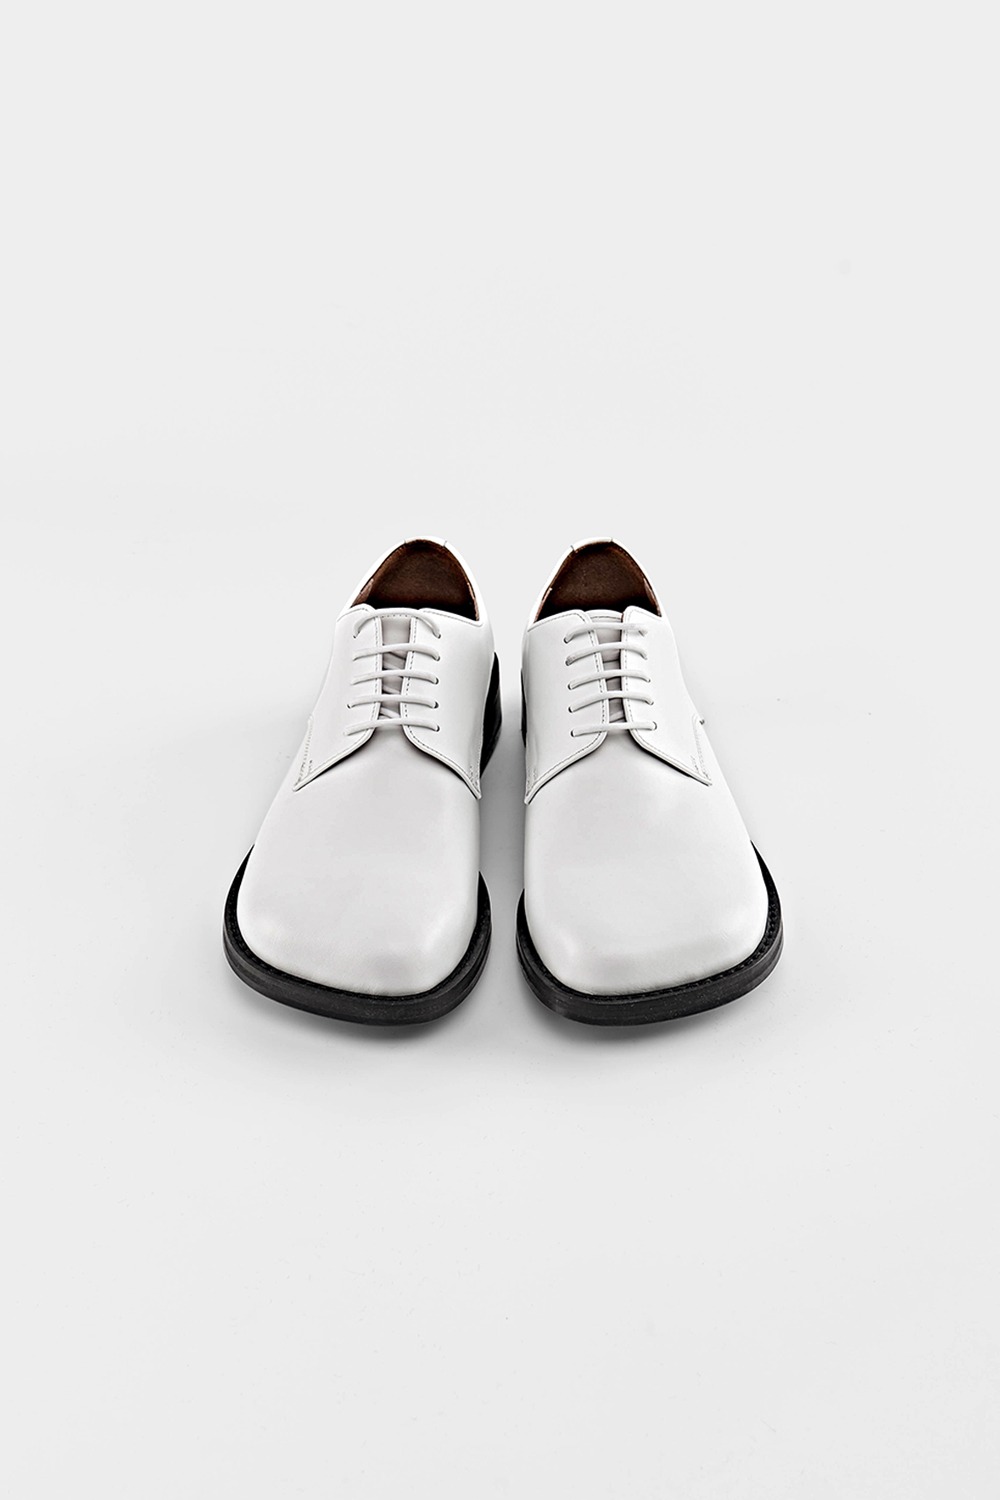 LIBERTY LEATHER ULGY DERBY SHOES